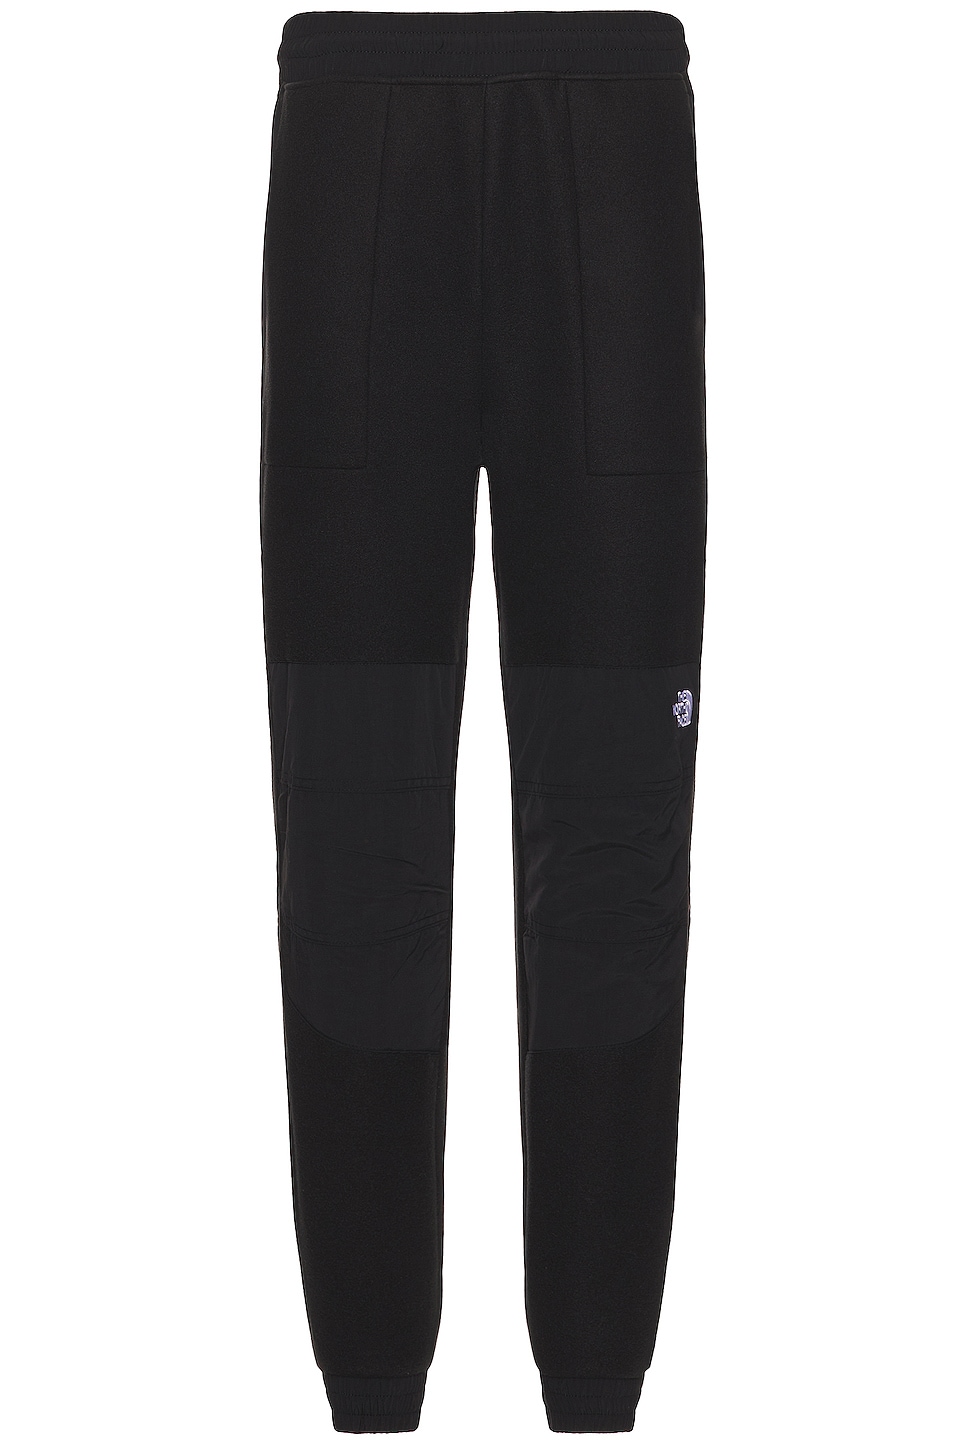 Image 1 of The North Face Denali Pants in Tnf Black